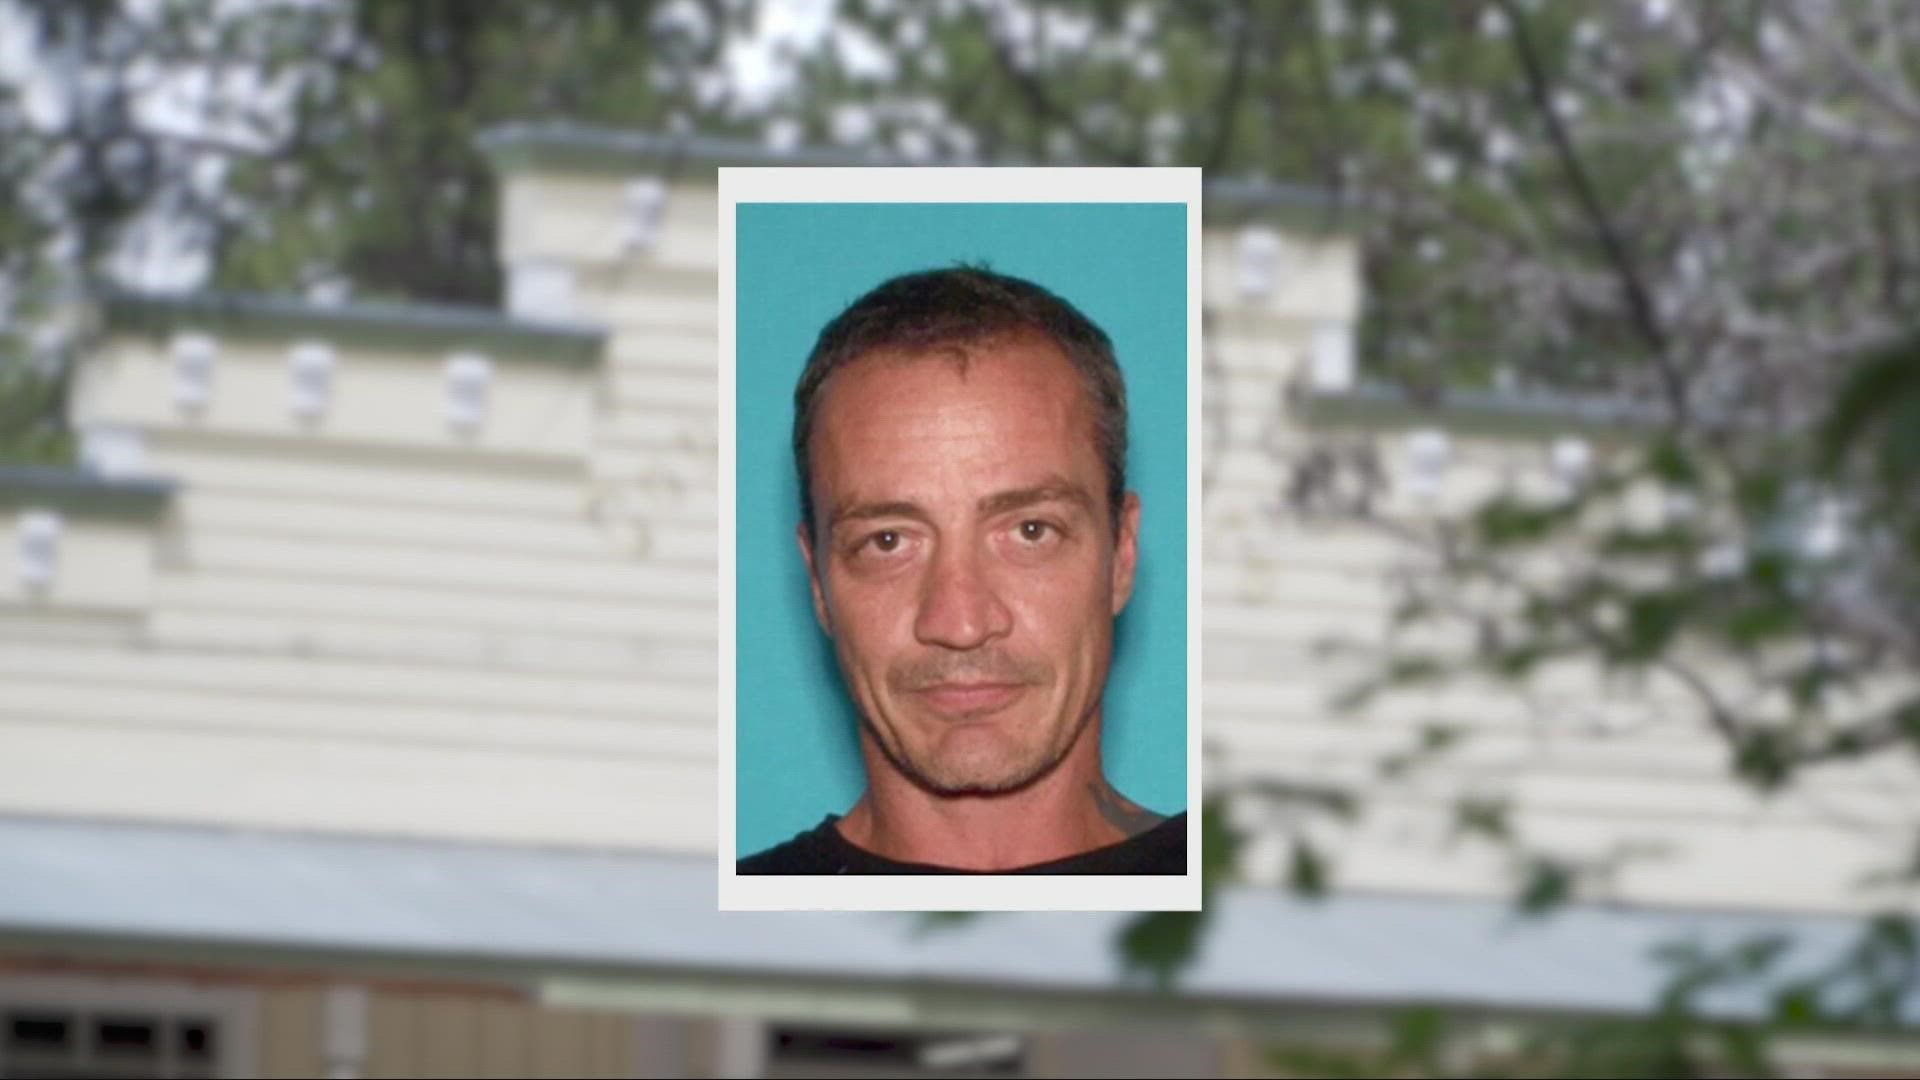 Firing shots at the store after kidnapping his ex-girlfriend, an employee of the store, law enforcement say the suspected kidnapper is 49-year-old Allyn Charpentier.